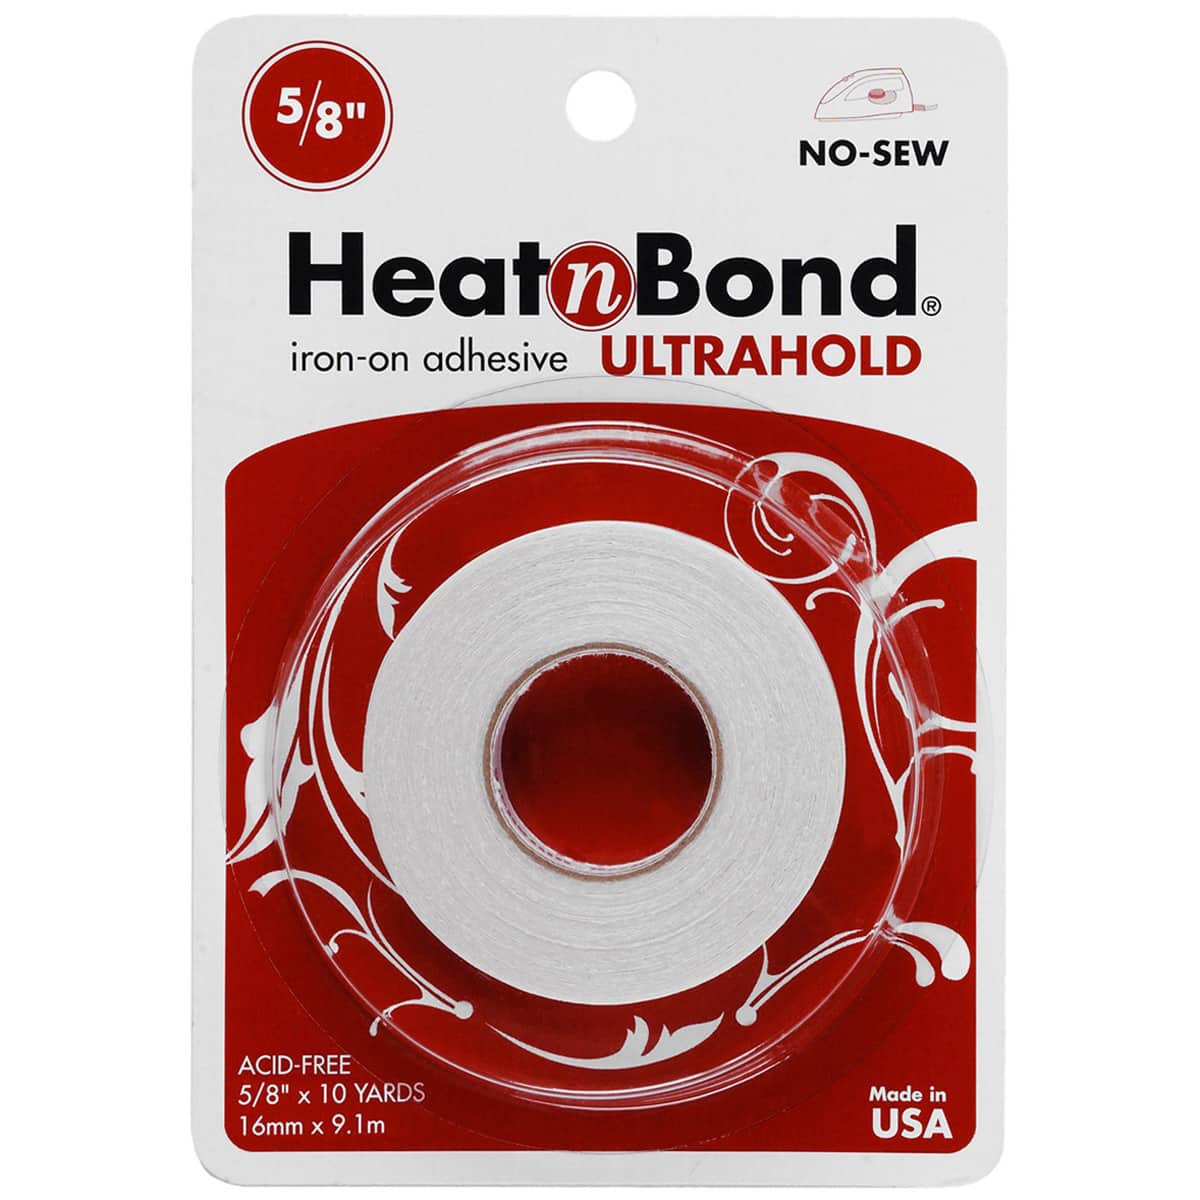 HeatnBond Soft Stretch Ultra Iron-On Adhesive Tape, 5/8 in x 10yds –  Quiltandsew.com